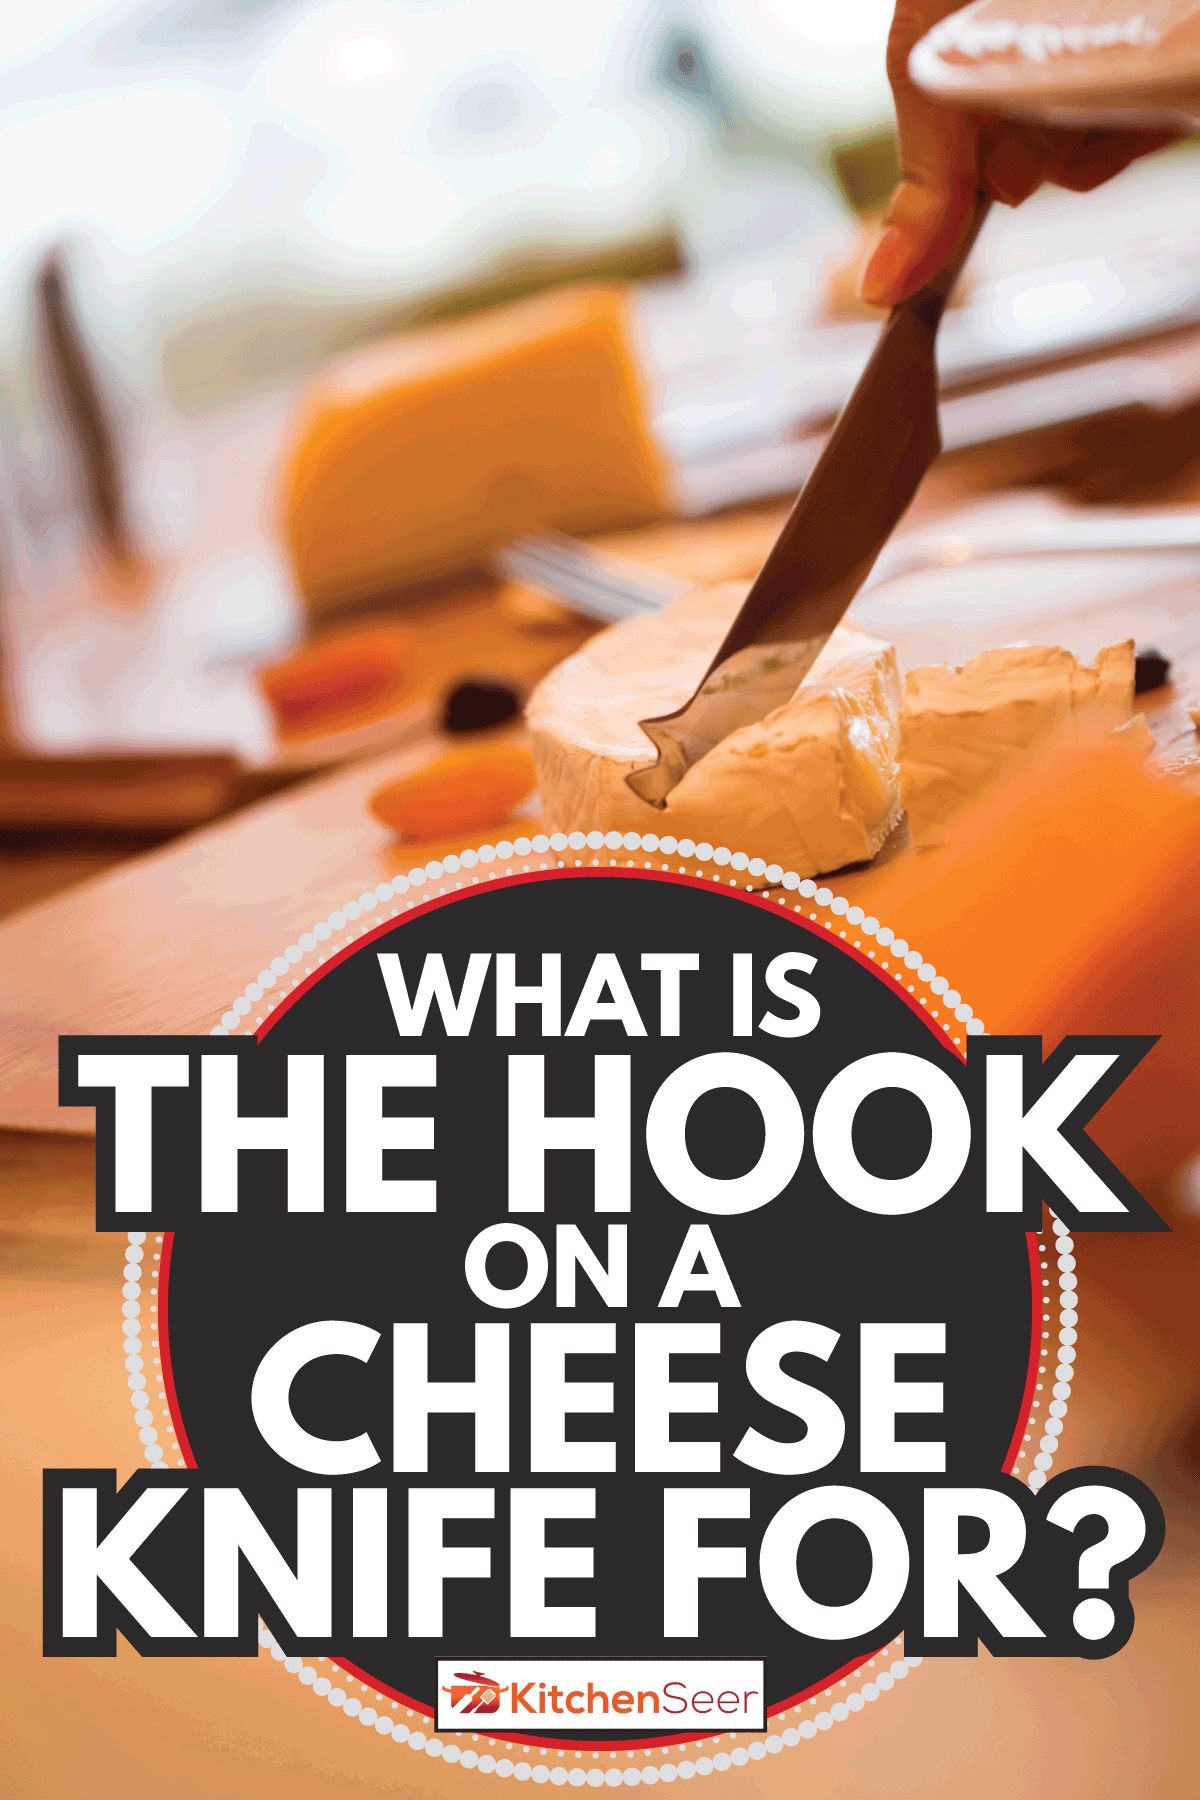 Human hand is cutting cheese, selective focus. What Is The Hook On A Cheese Knife For